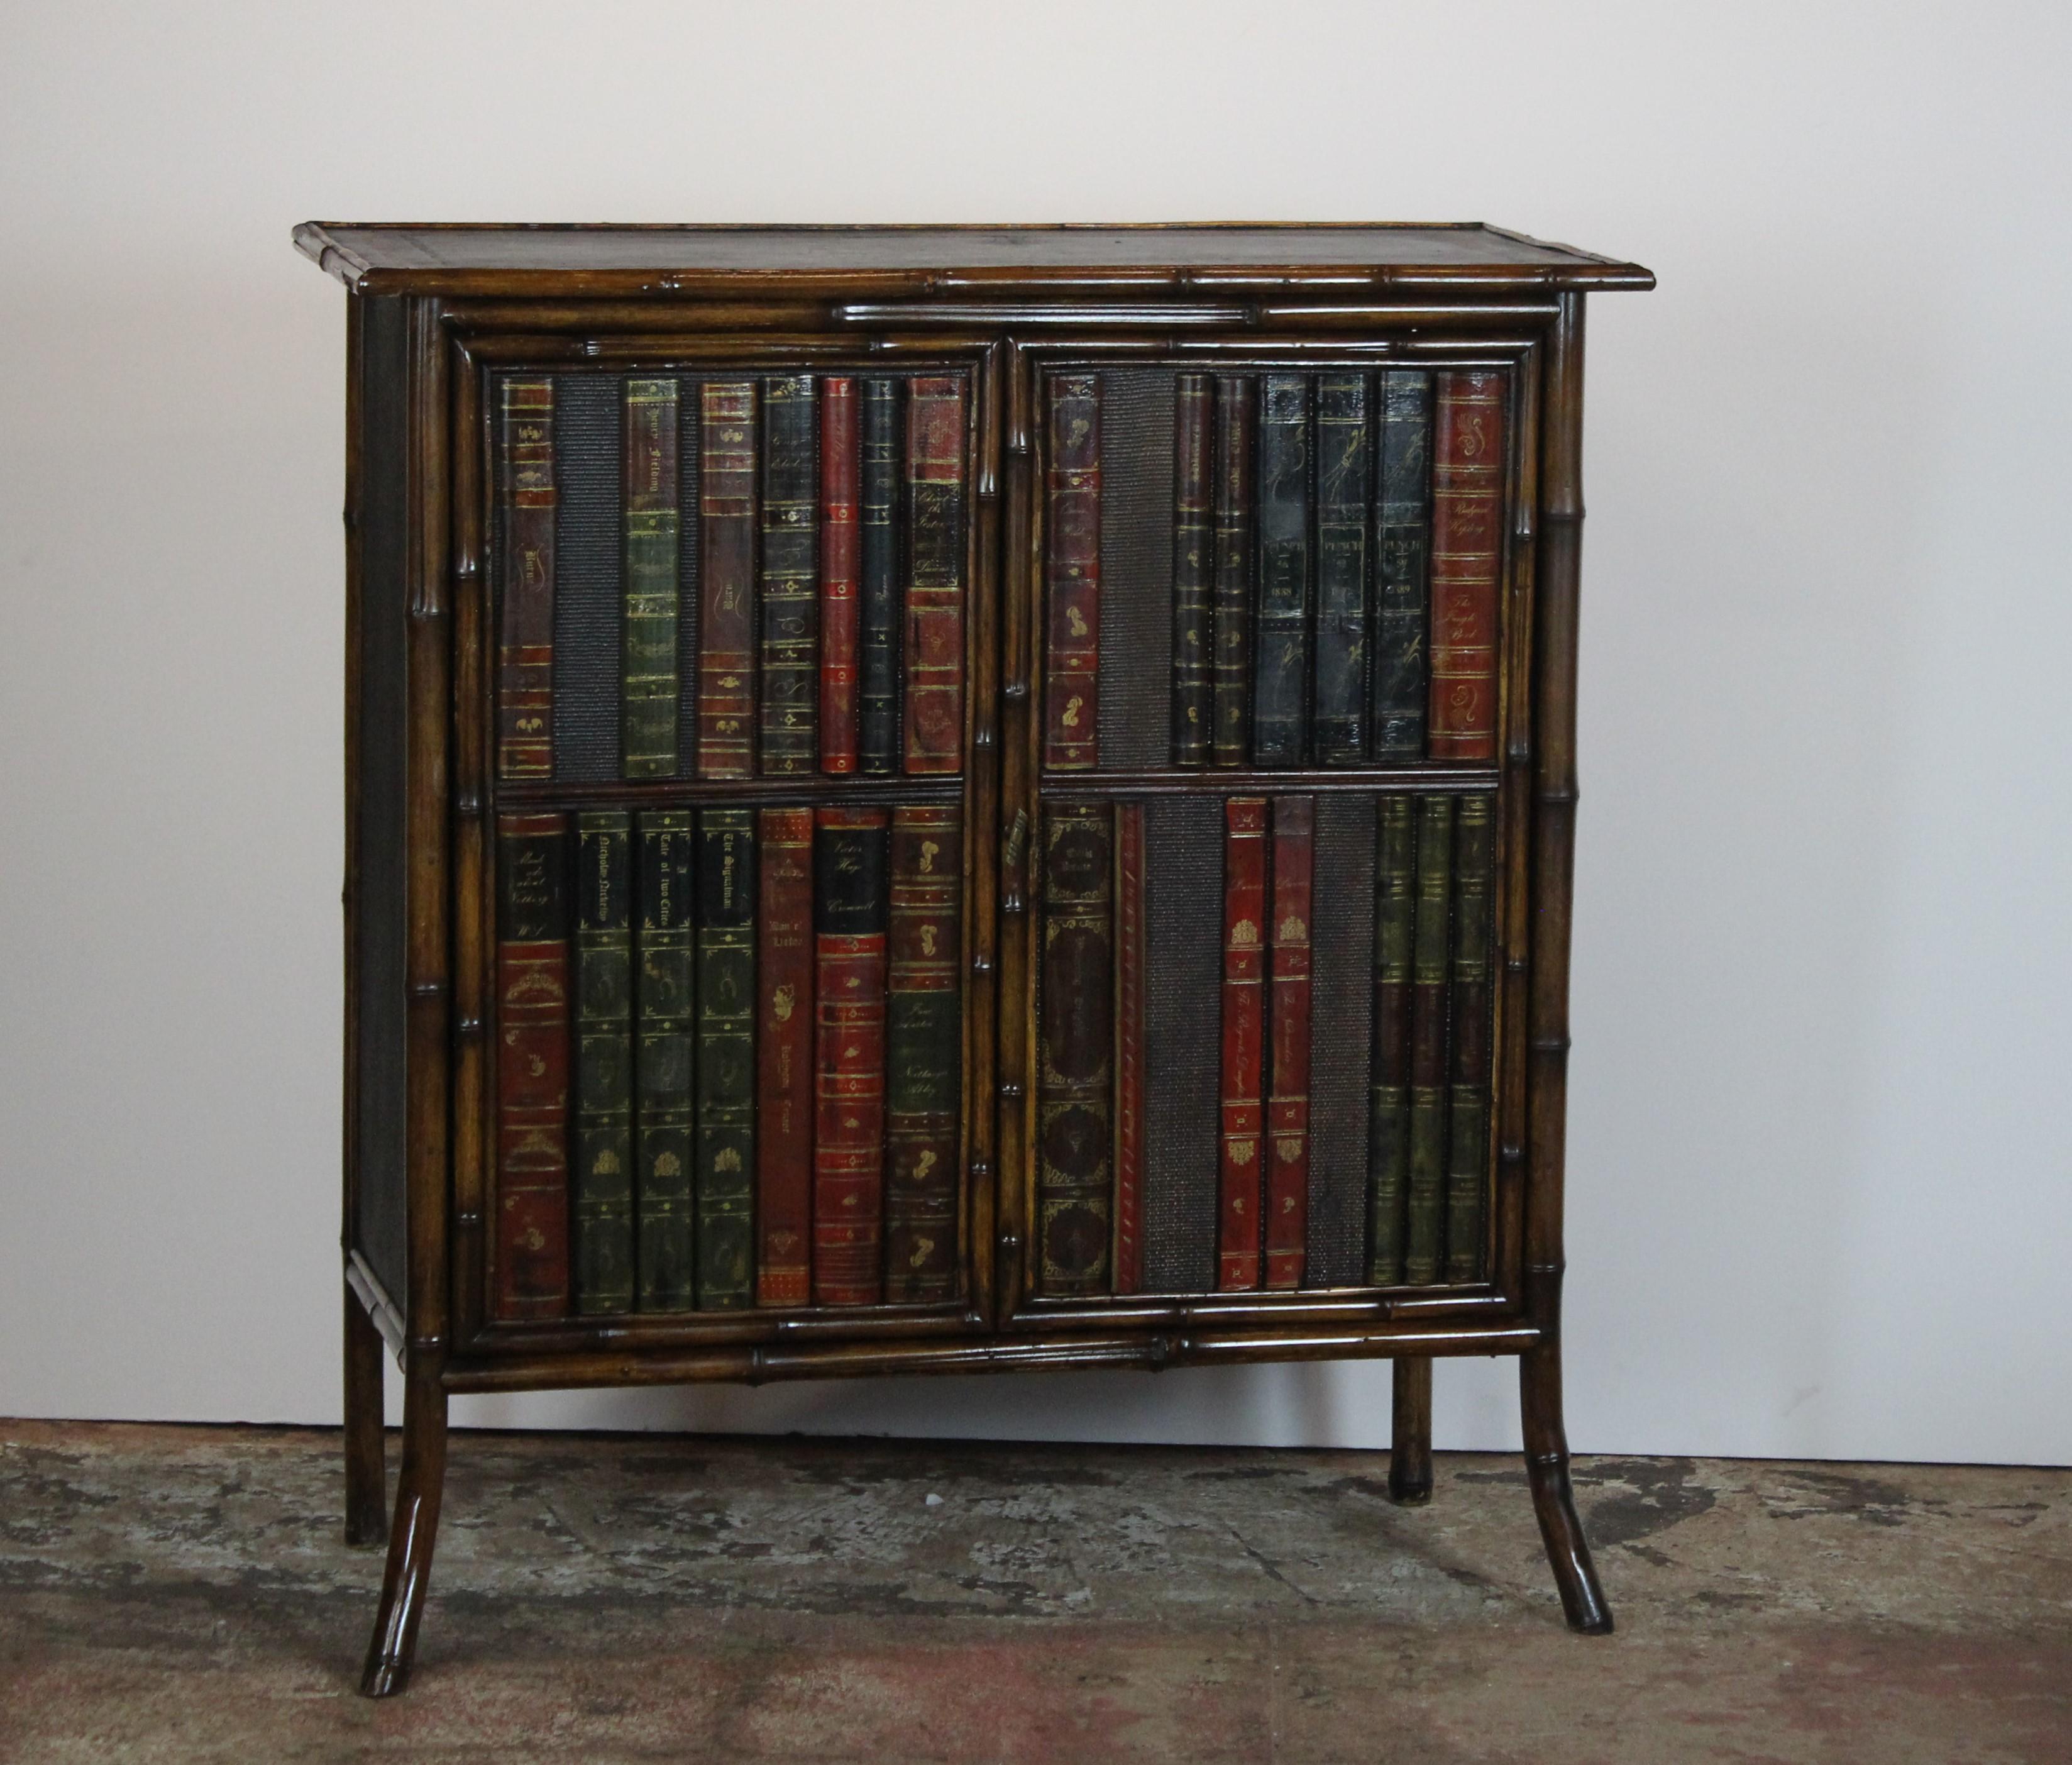 19th century French bamboo cabinet. The doors have faux leather books and a single shelf.